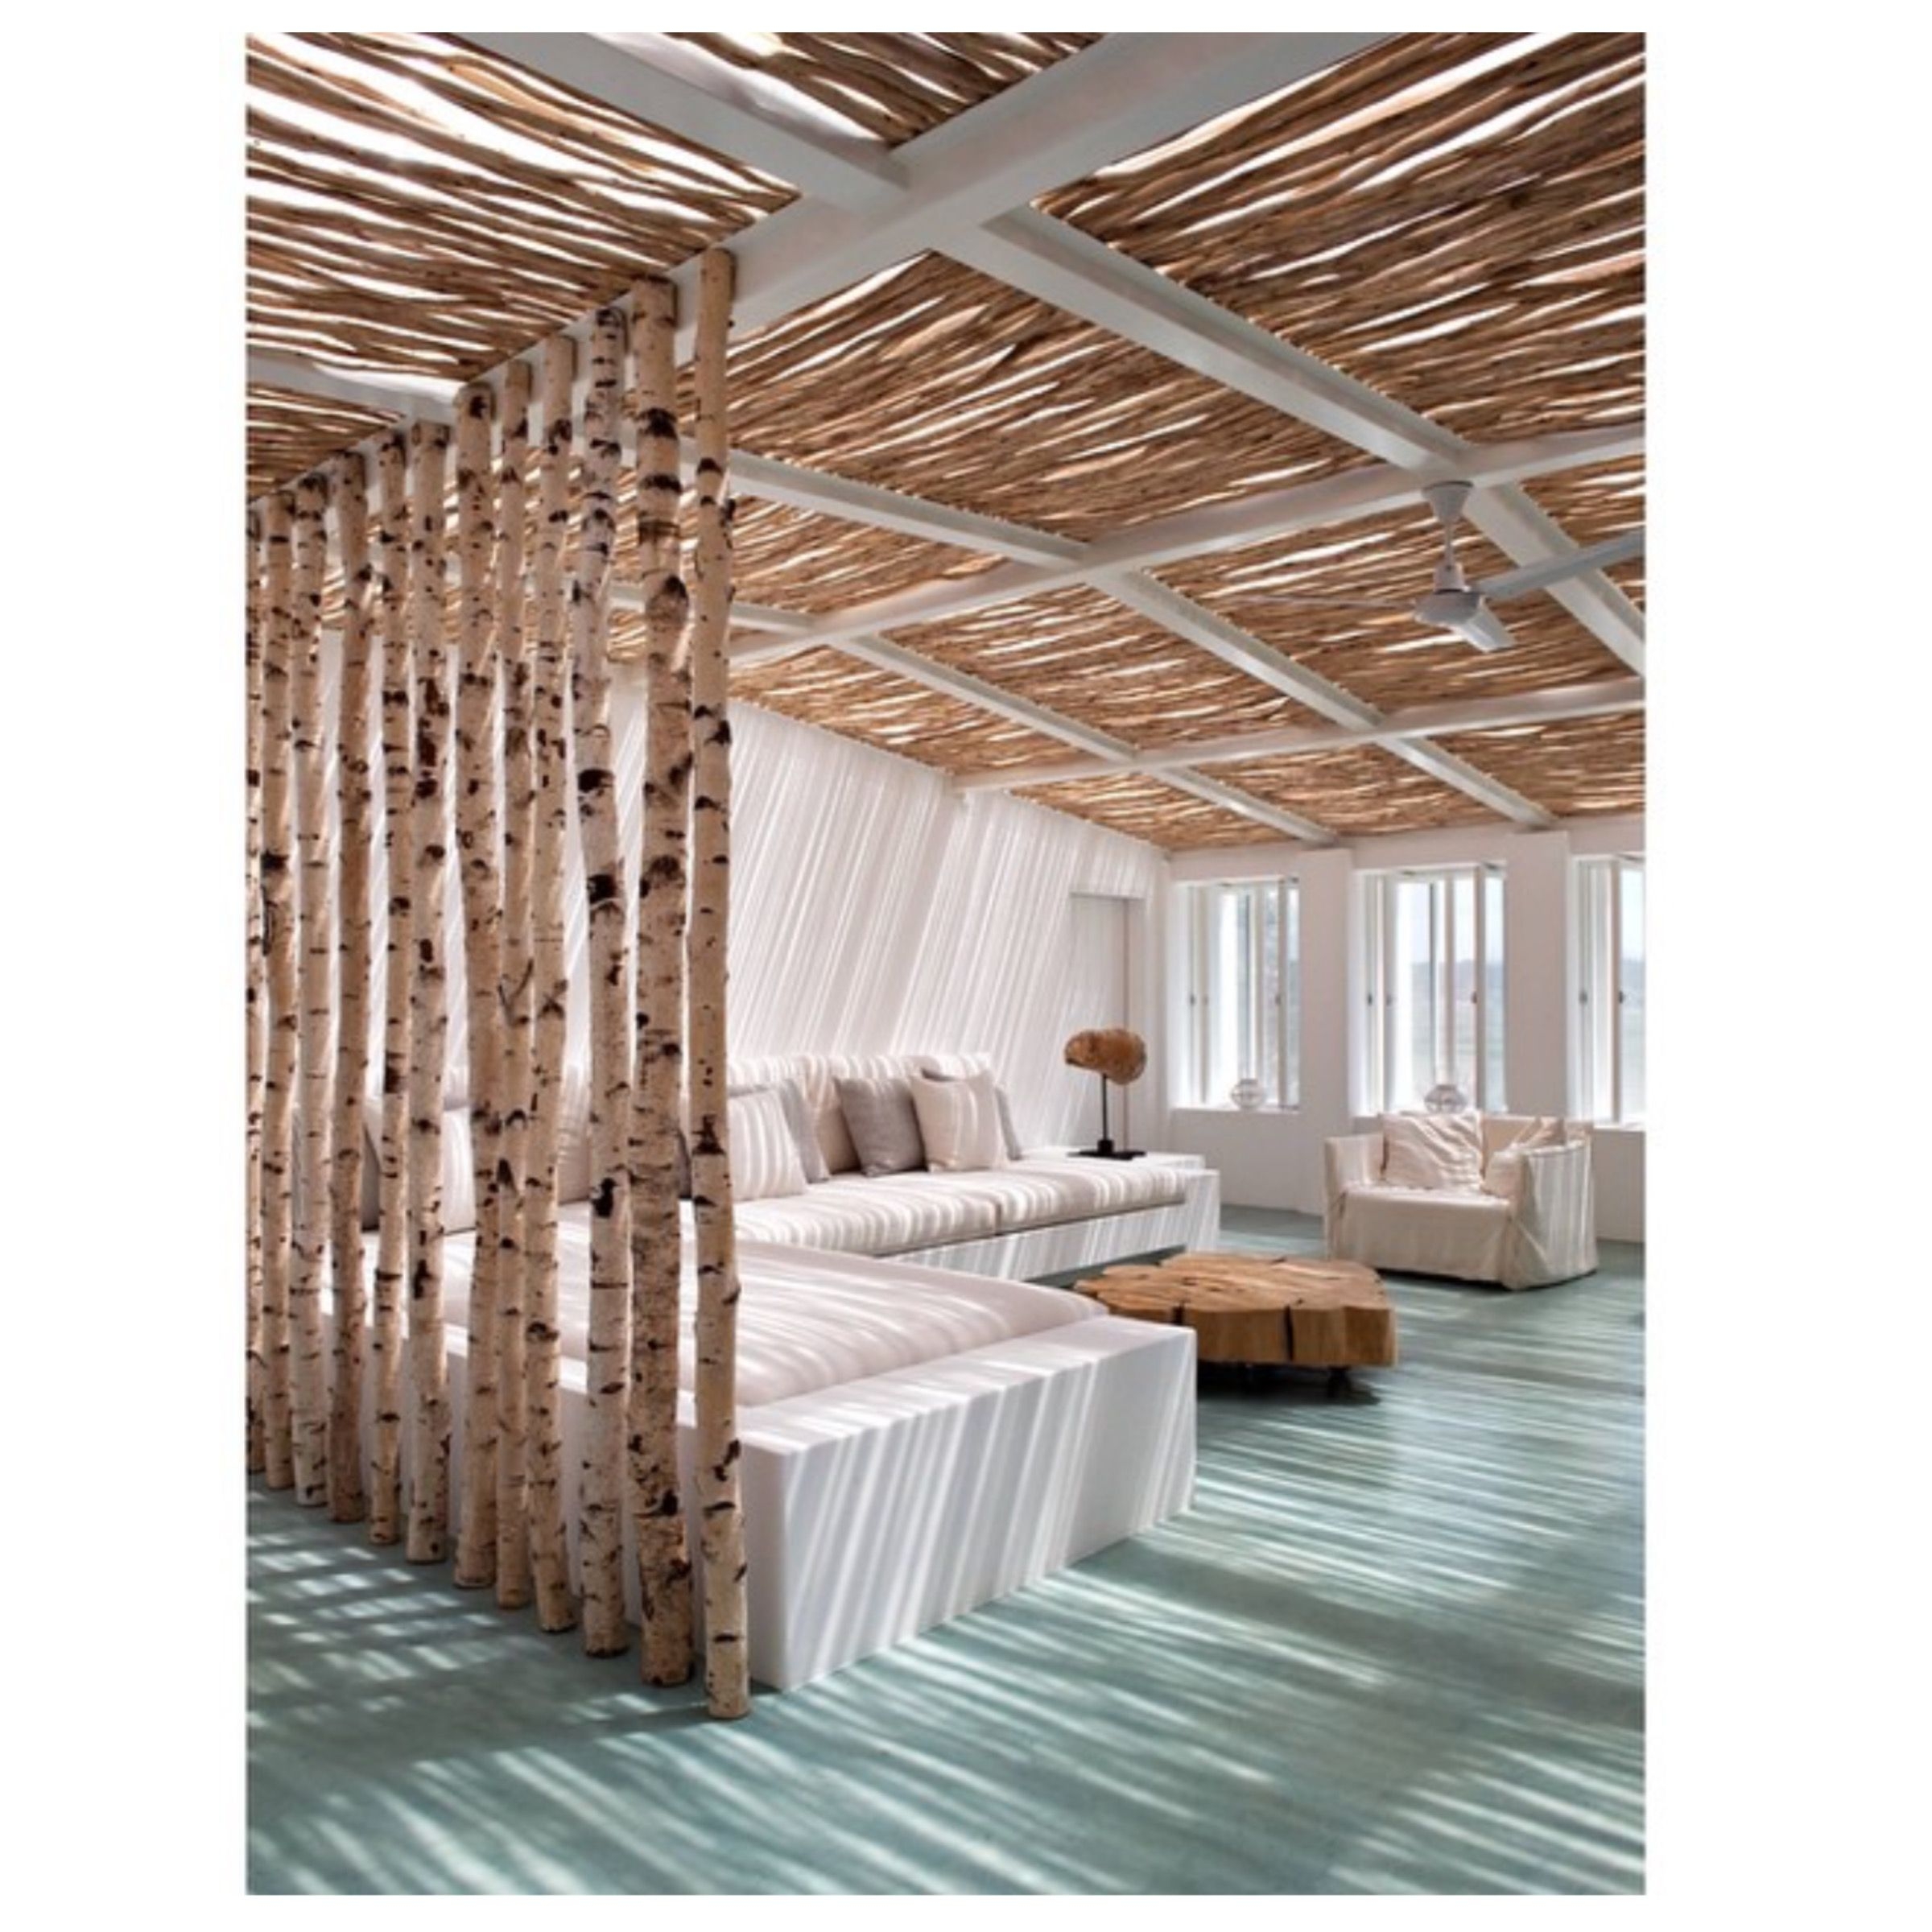 Bamboo partition